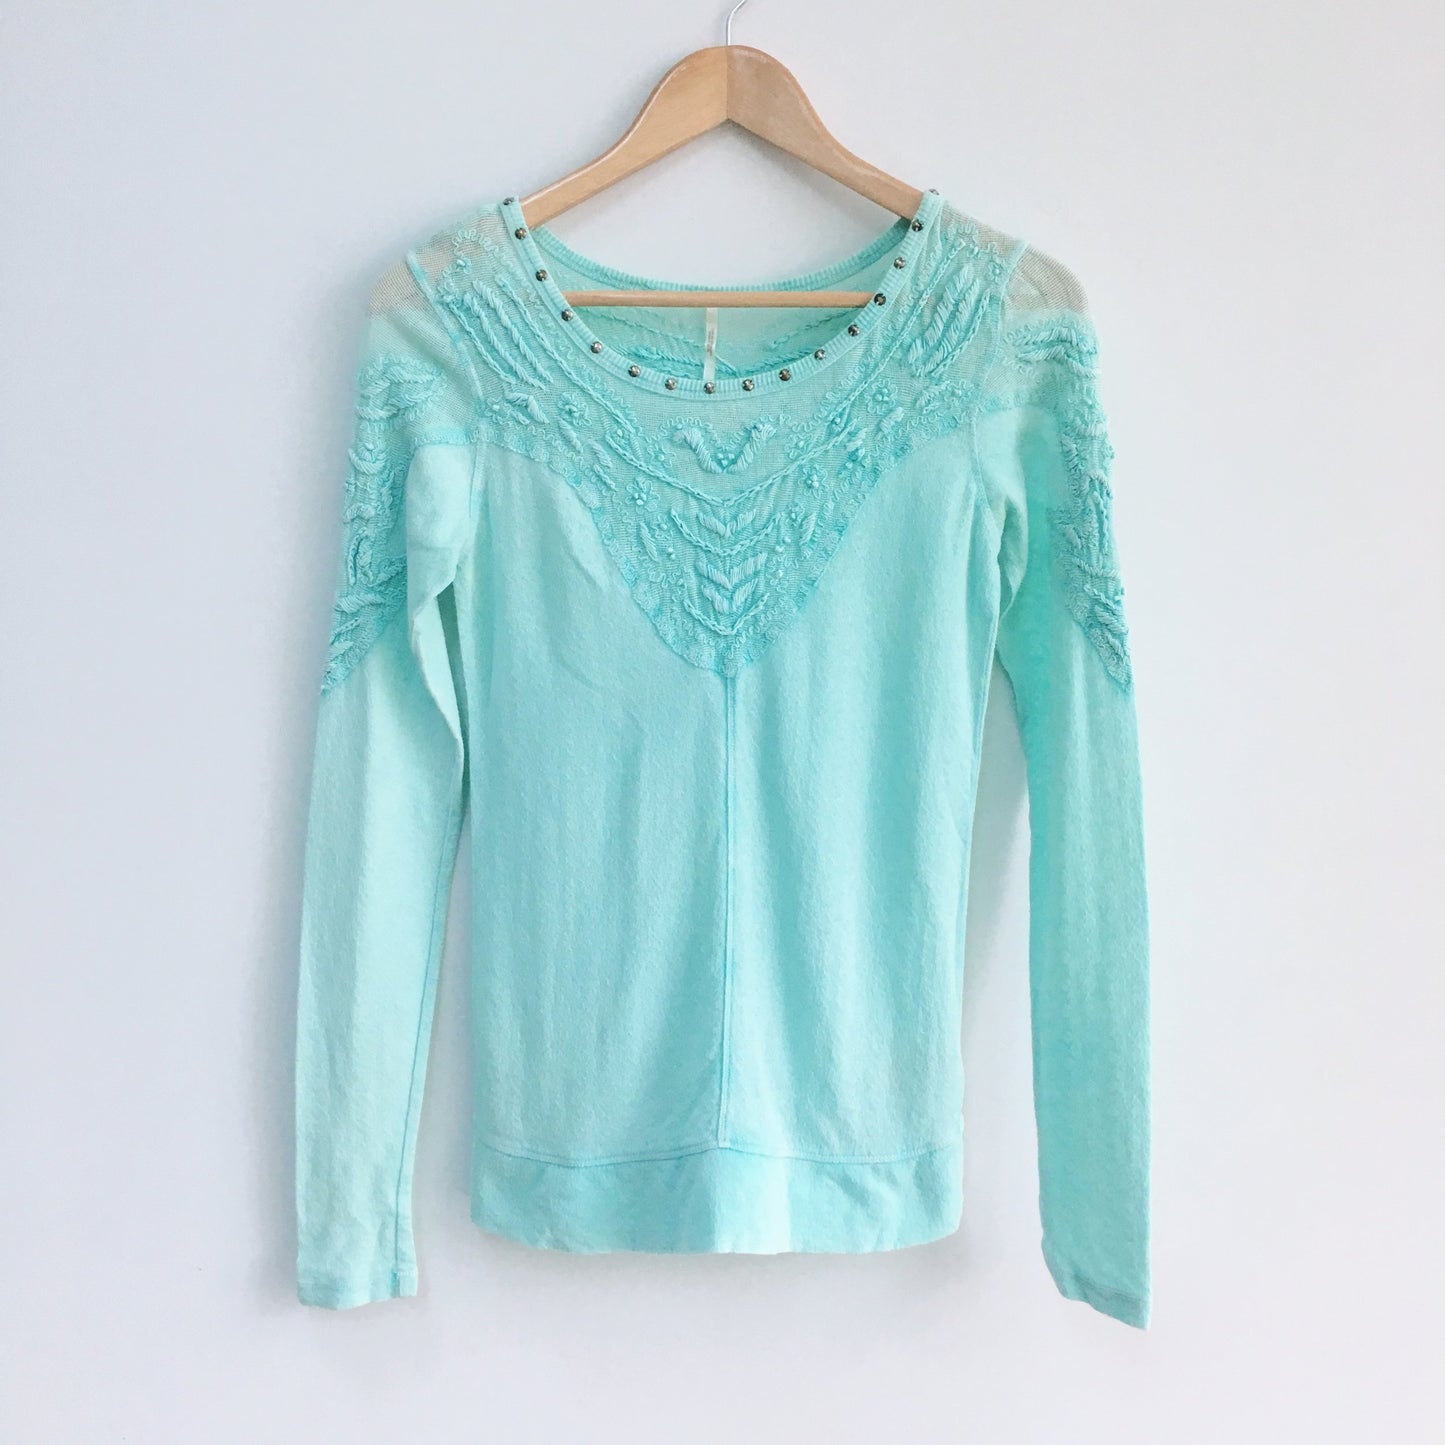 Free People Long Sleeve Top with Embroidery - Size XS